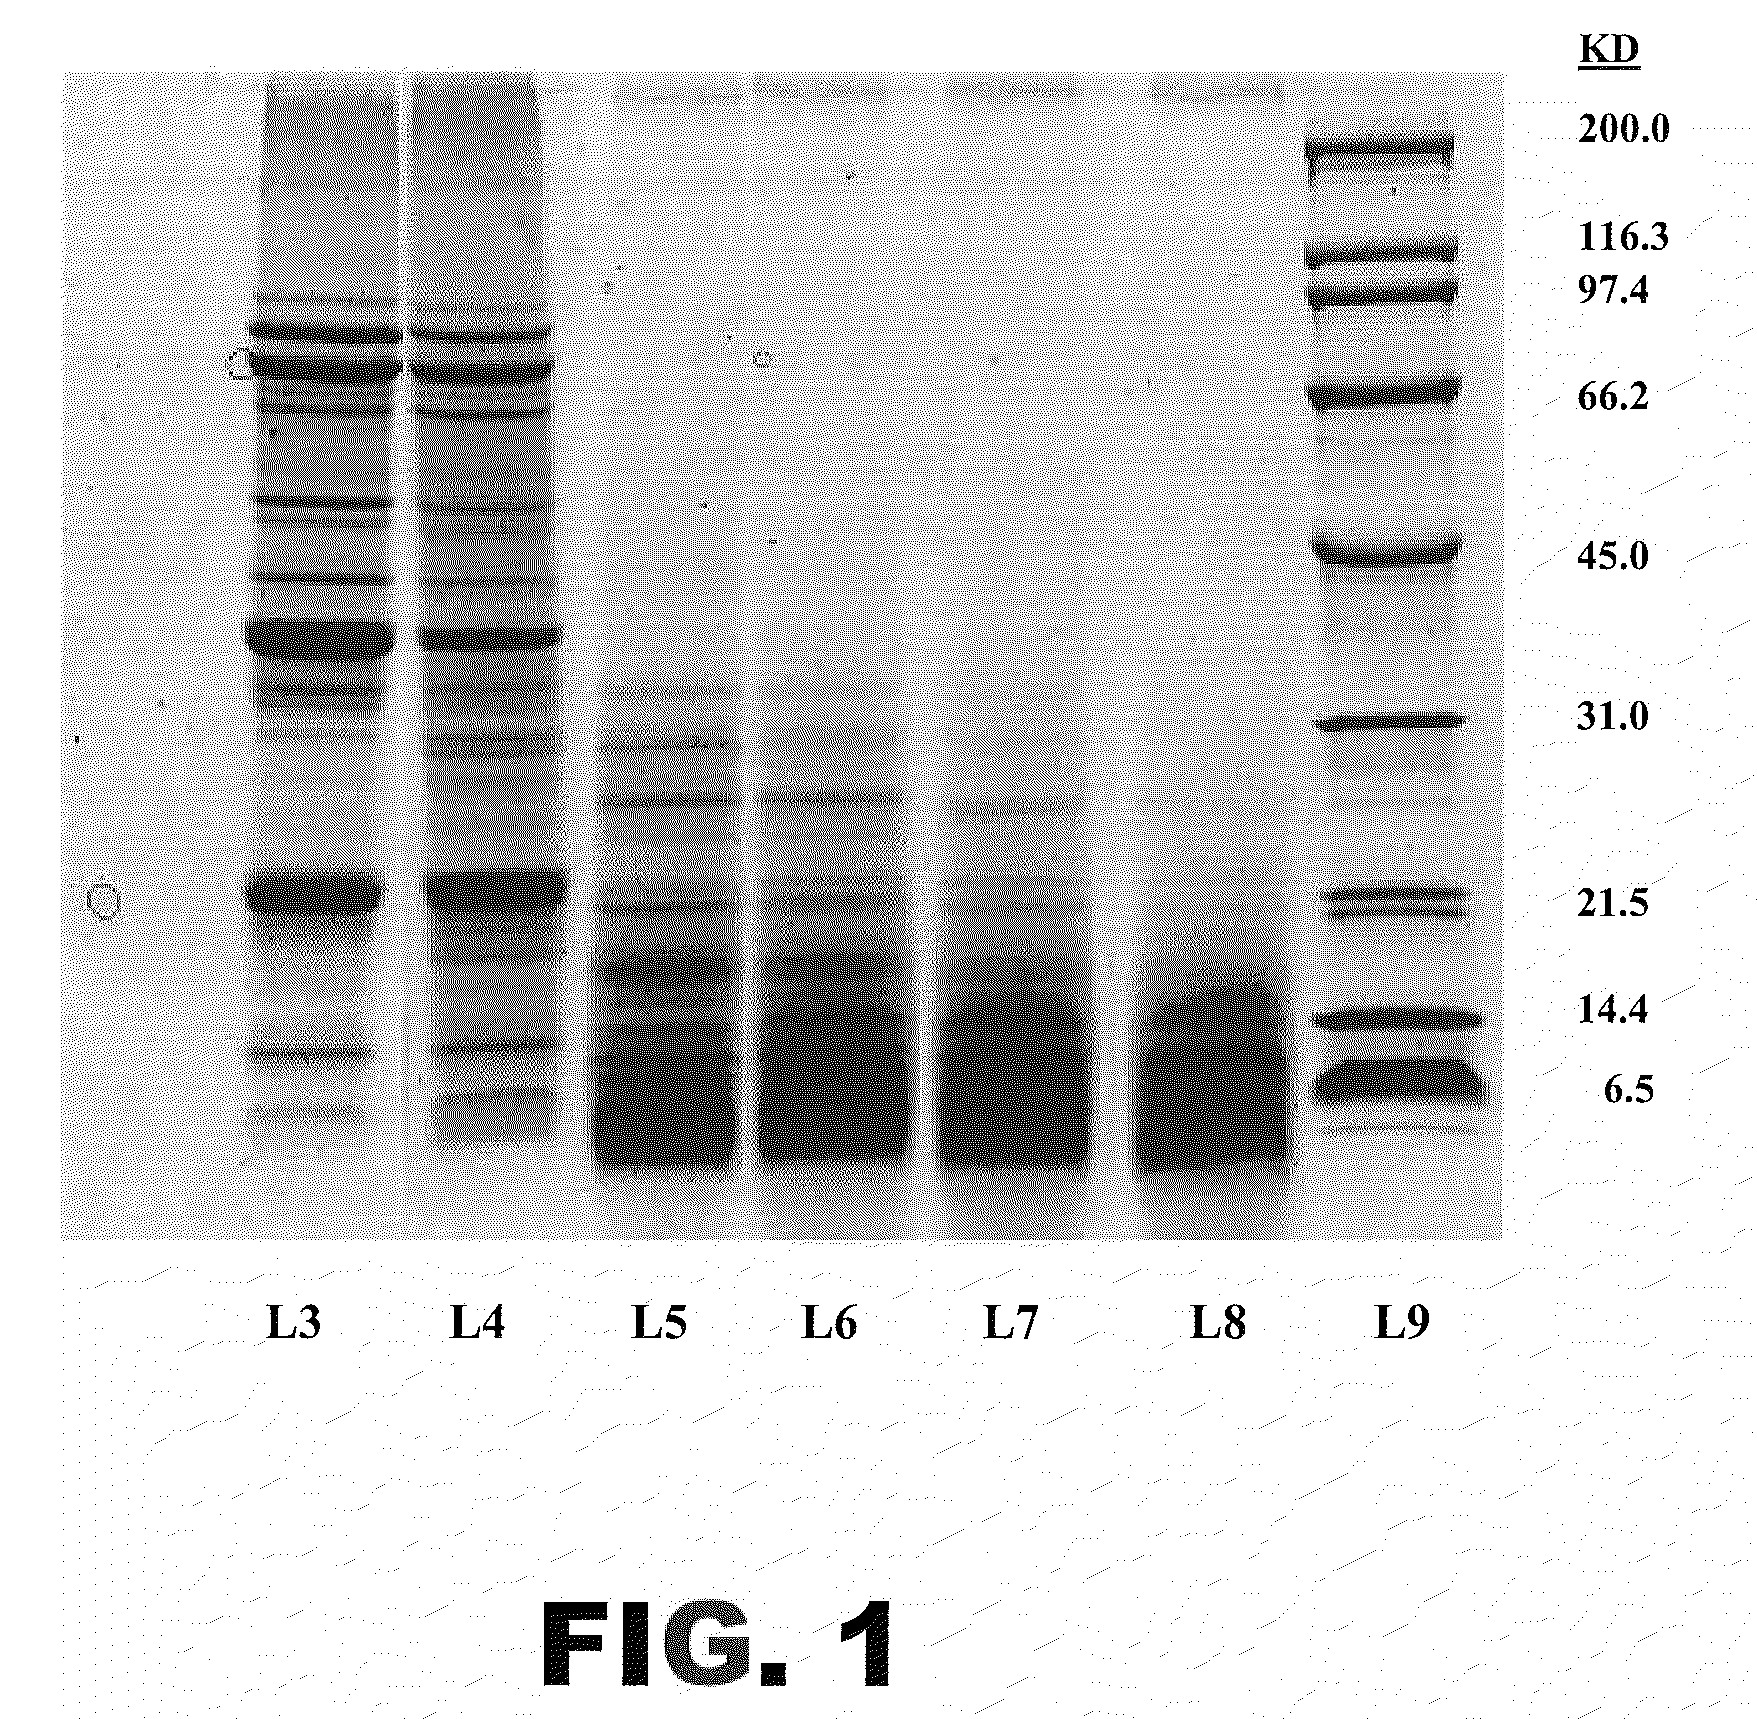 Protein Hydrolysate Compositions Having Improved Sensory Characteristics and Physical Properties